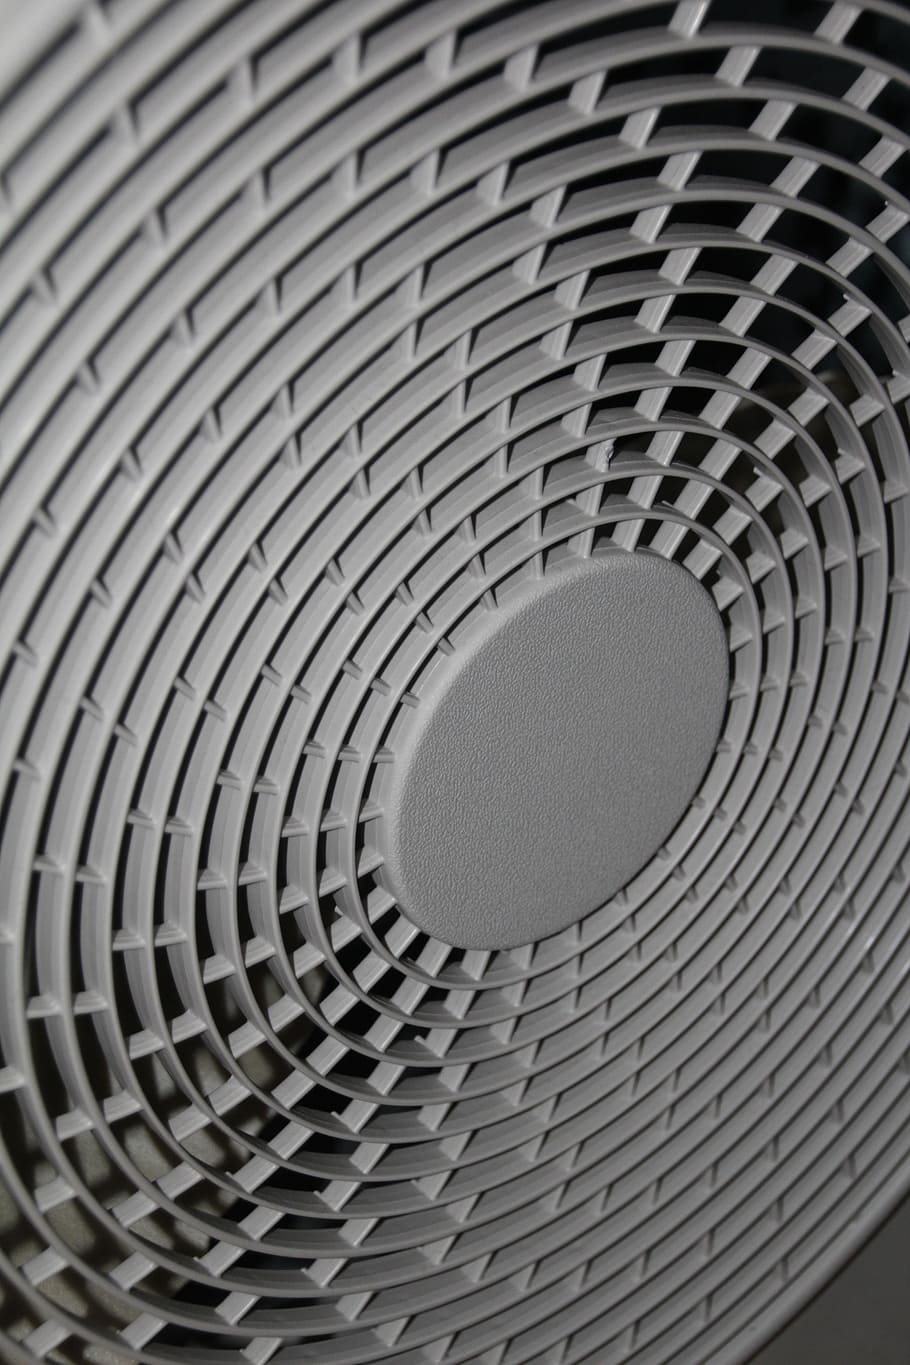 grille, air conditioner, fan, texture, pattern, full frame, backgrounds, geometric shape, circle, design